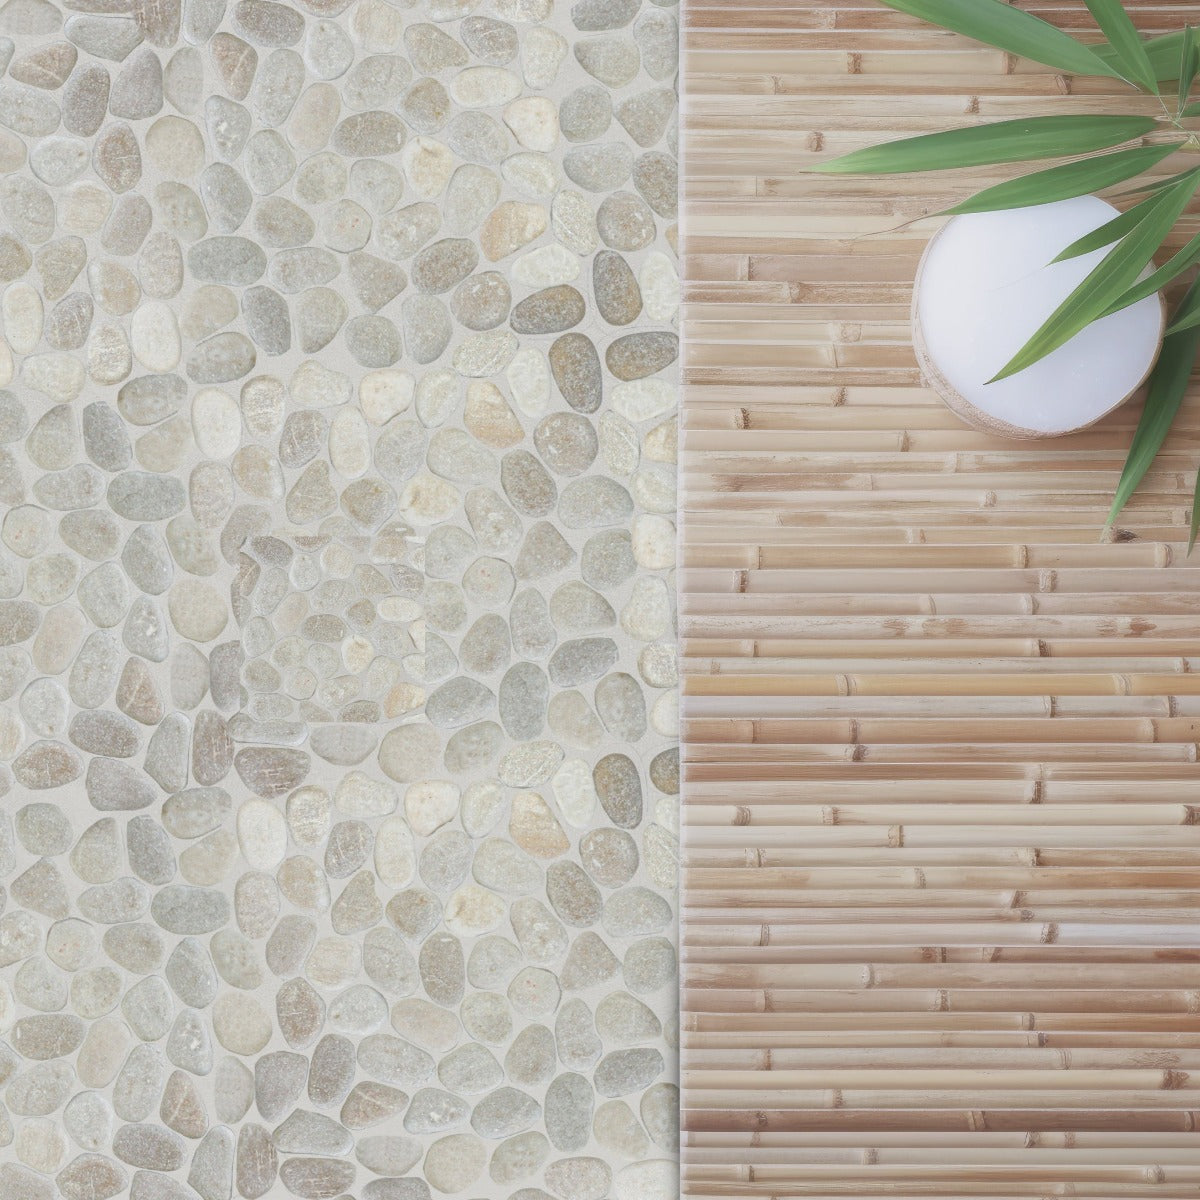 Tan pebble tile flooring with bamboo sheet under a white candle